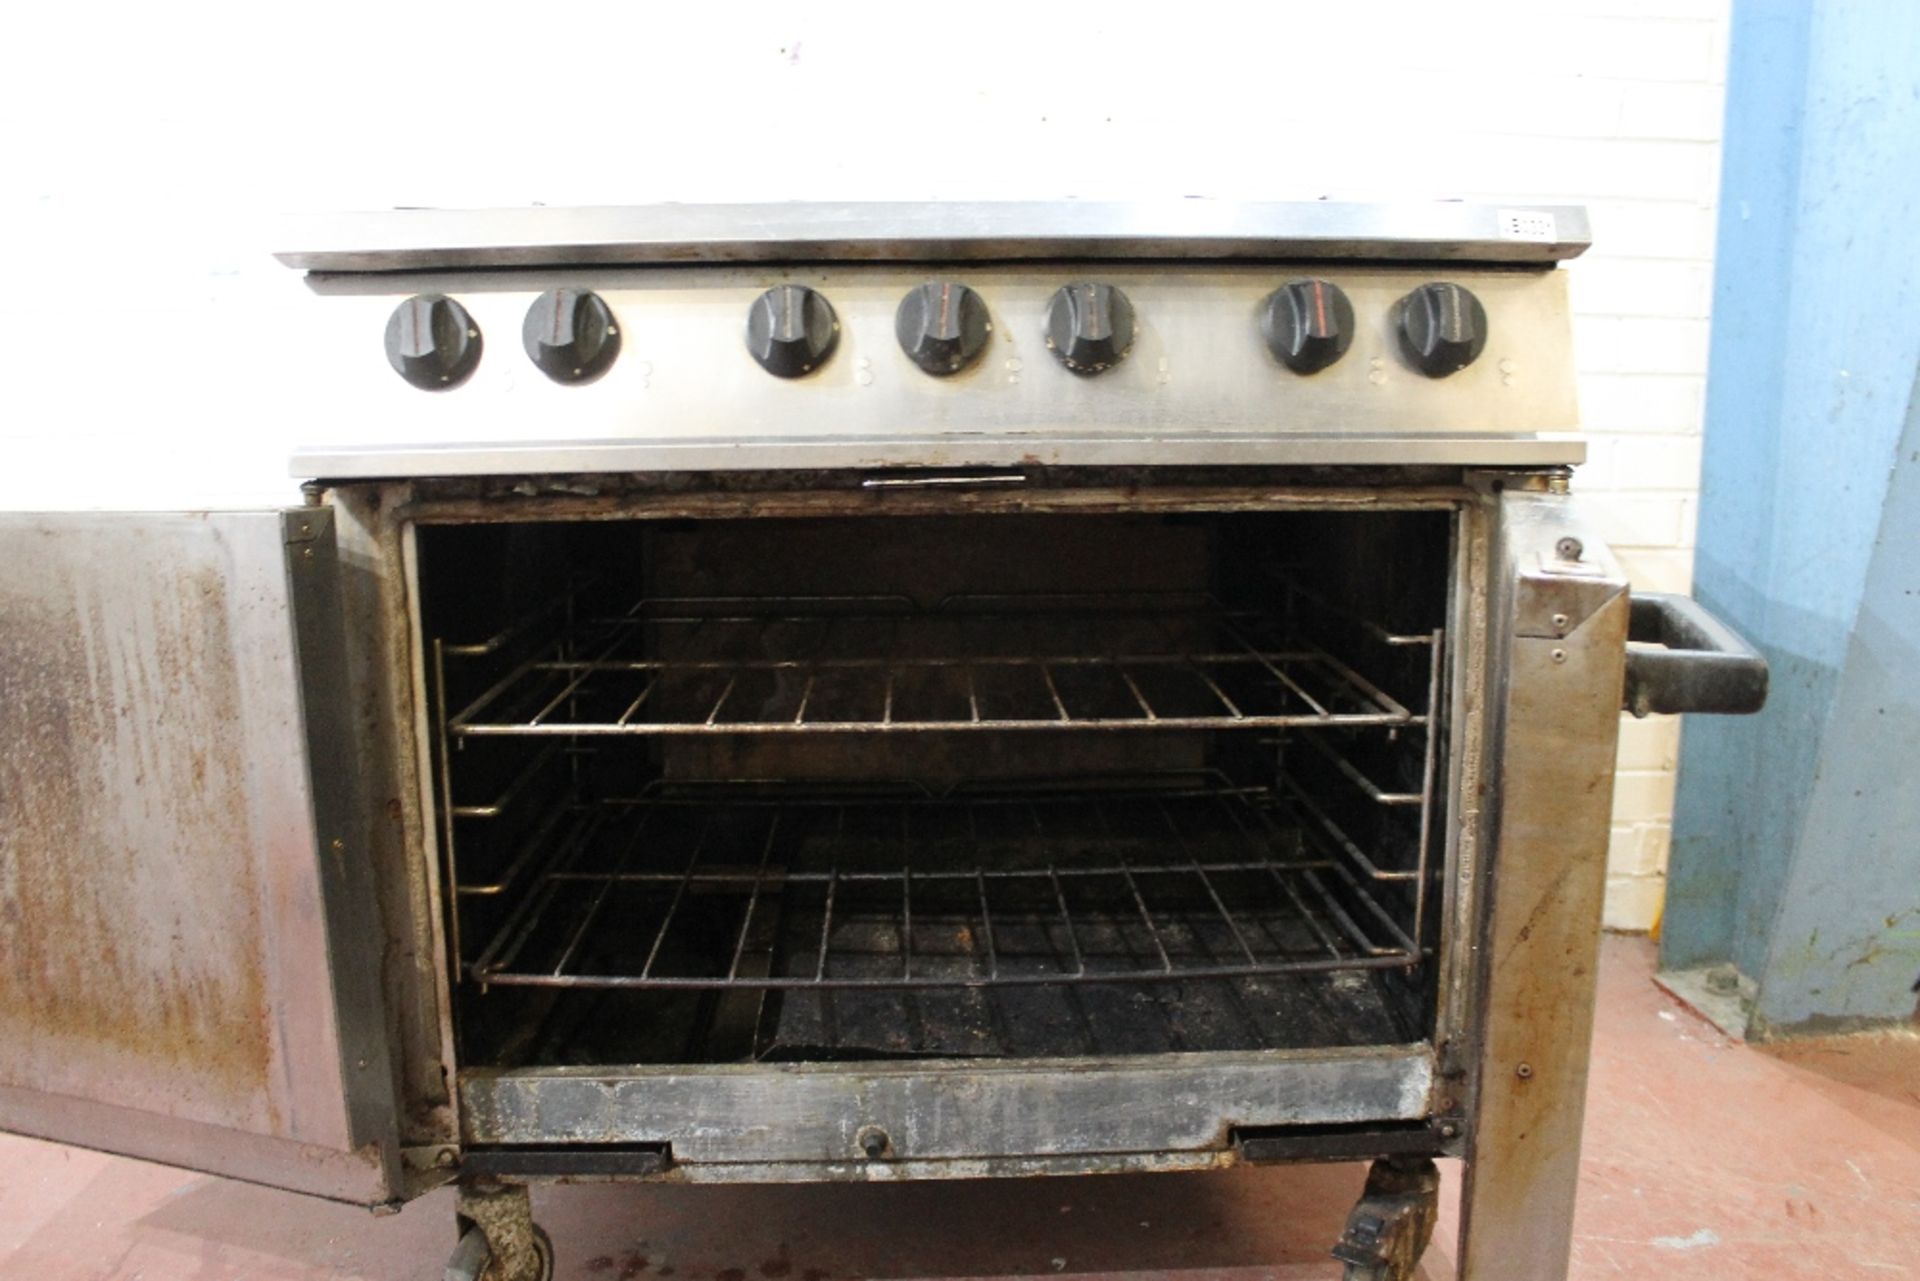 Falcon Dominator Six Burner Gas Cooker & Double Oven - Image 3 of 3